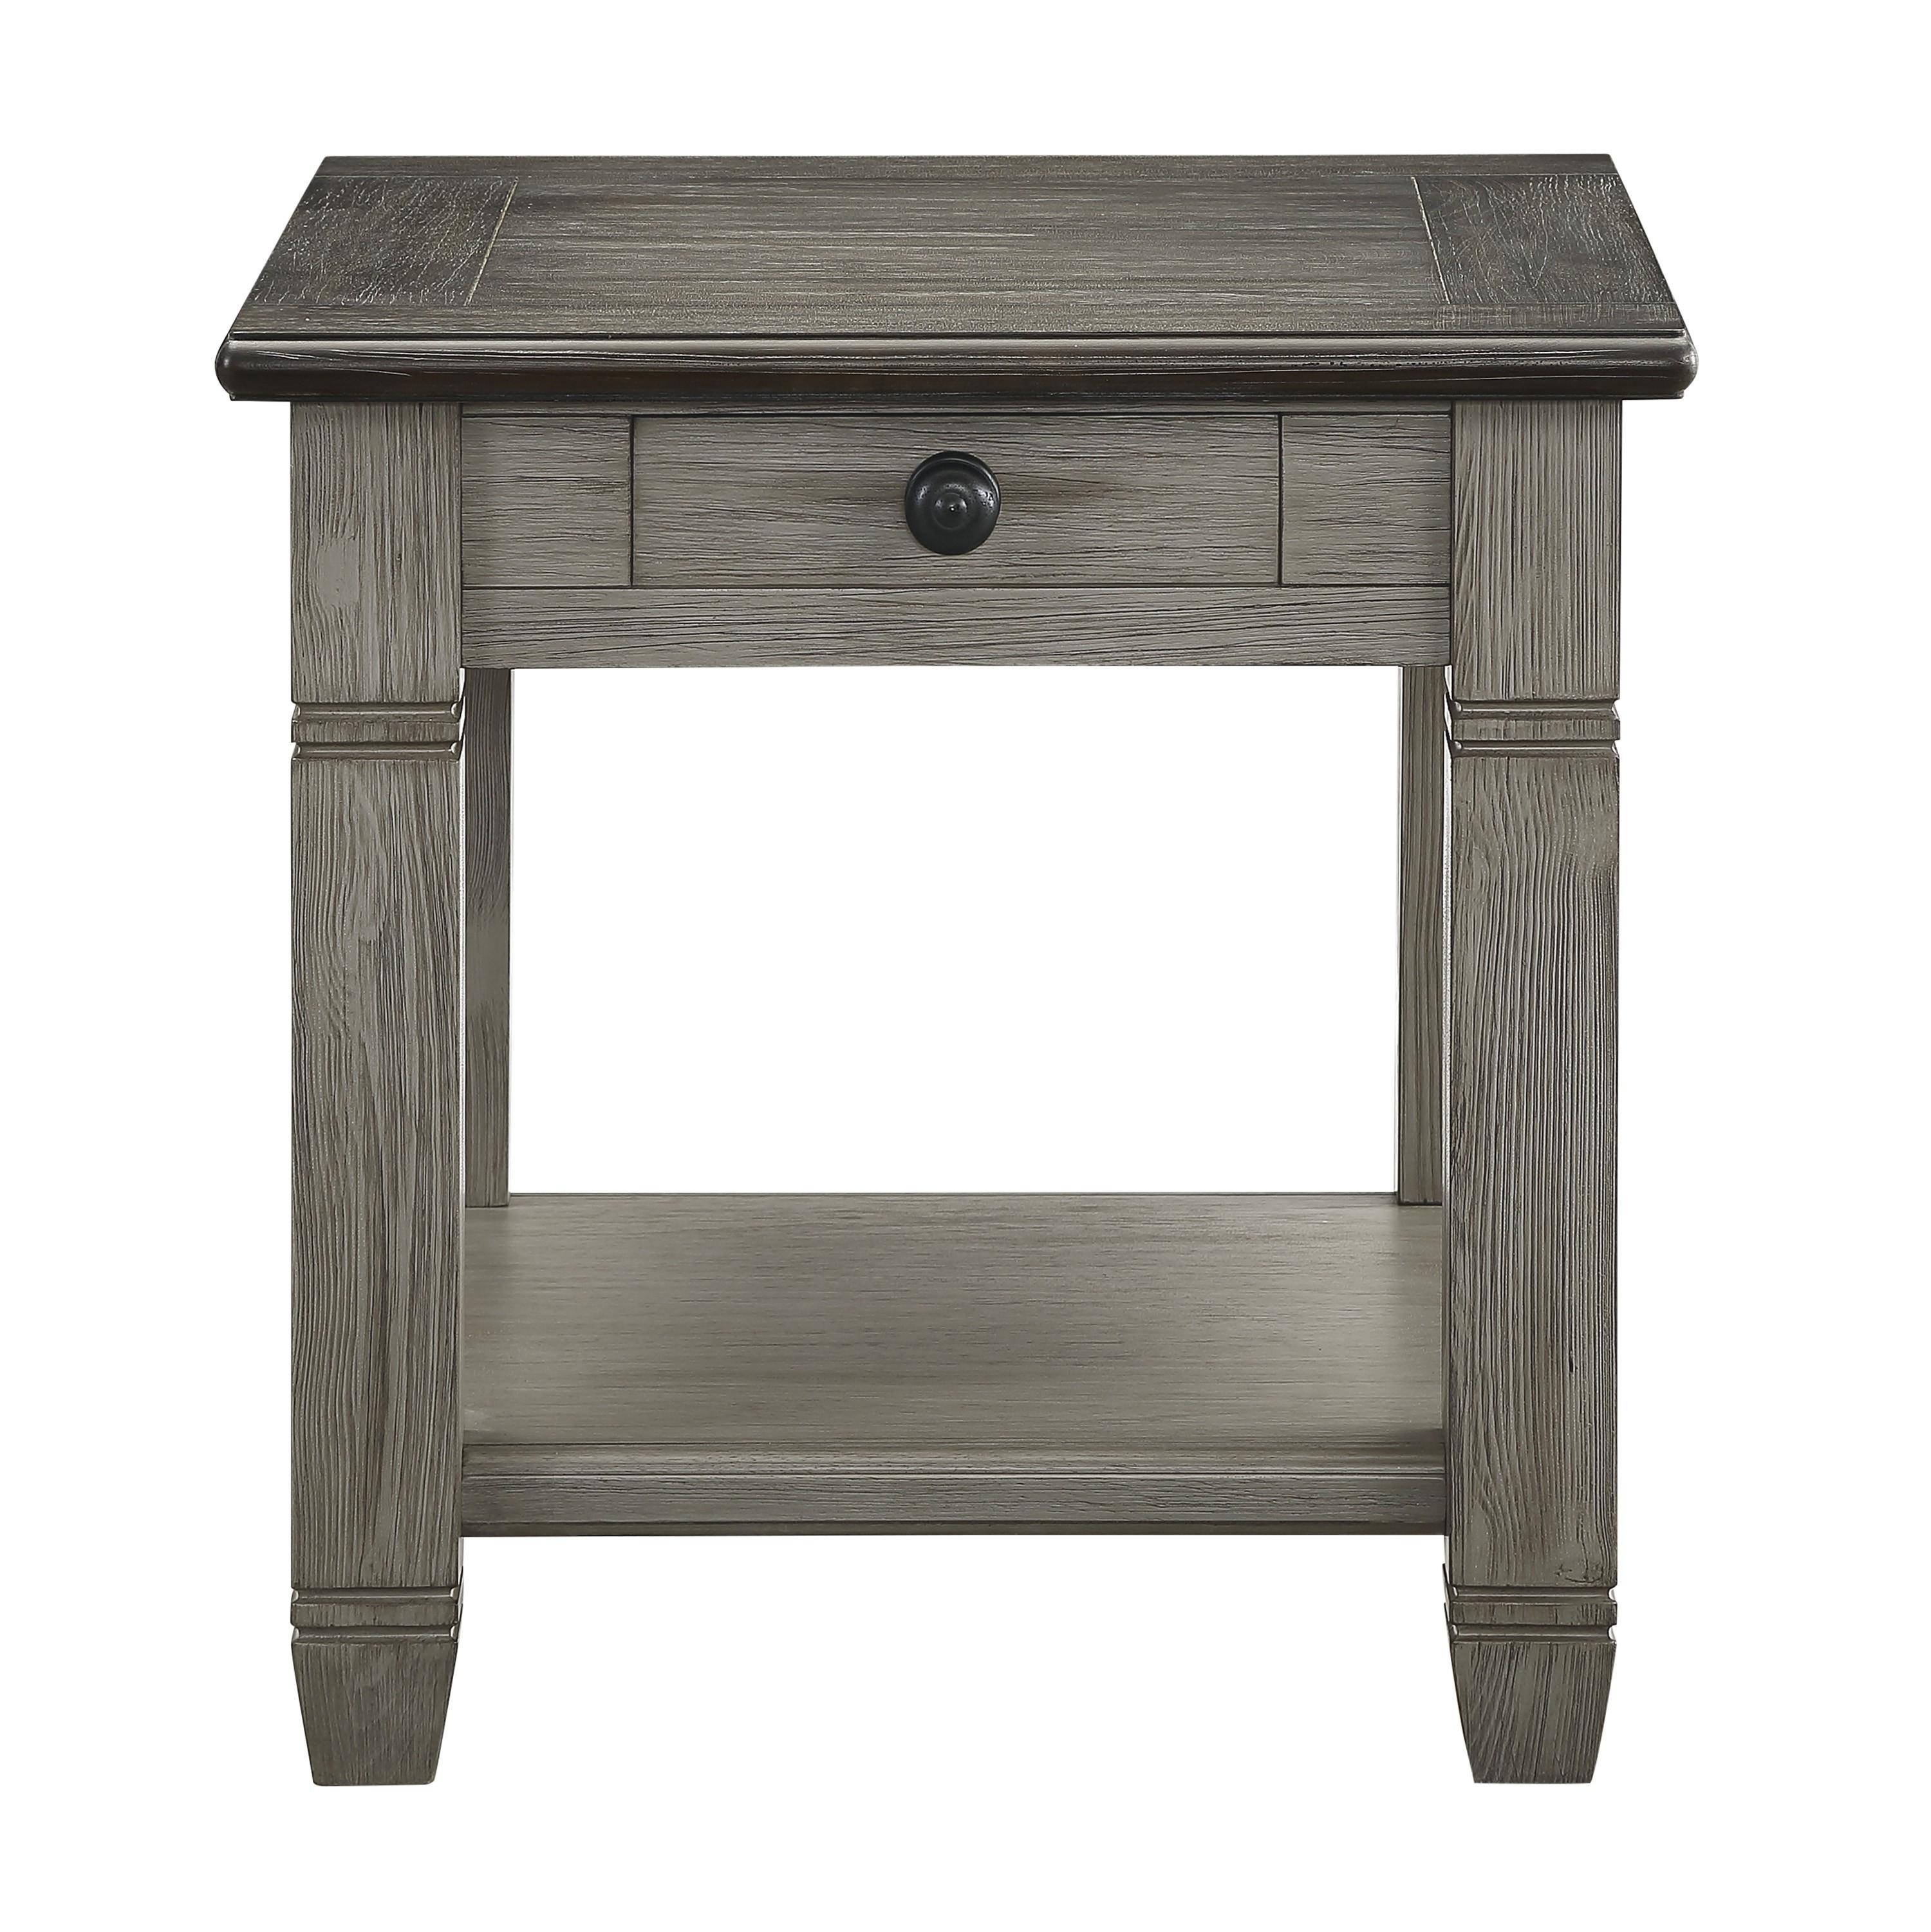 Homelegance 5627GY-04 Granby End Table